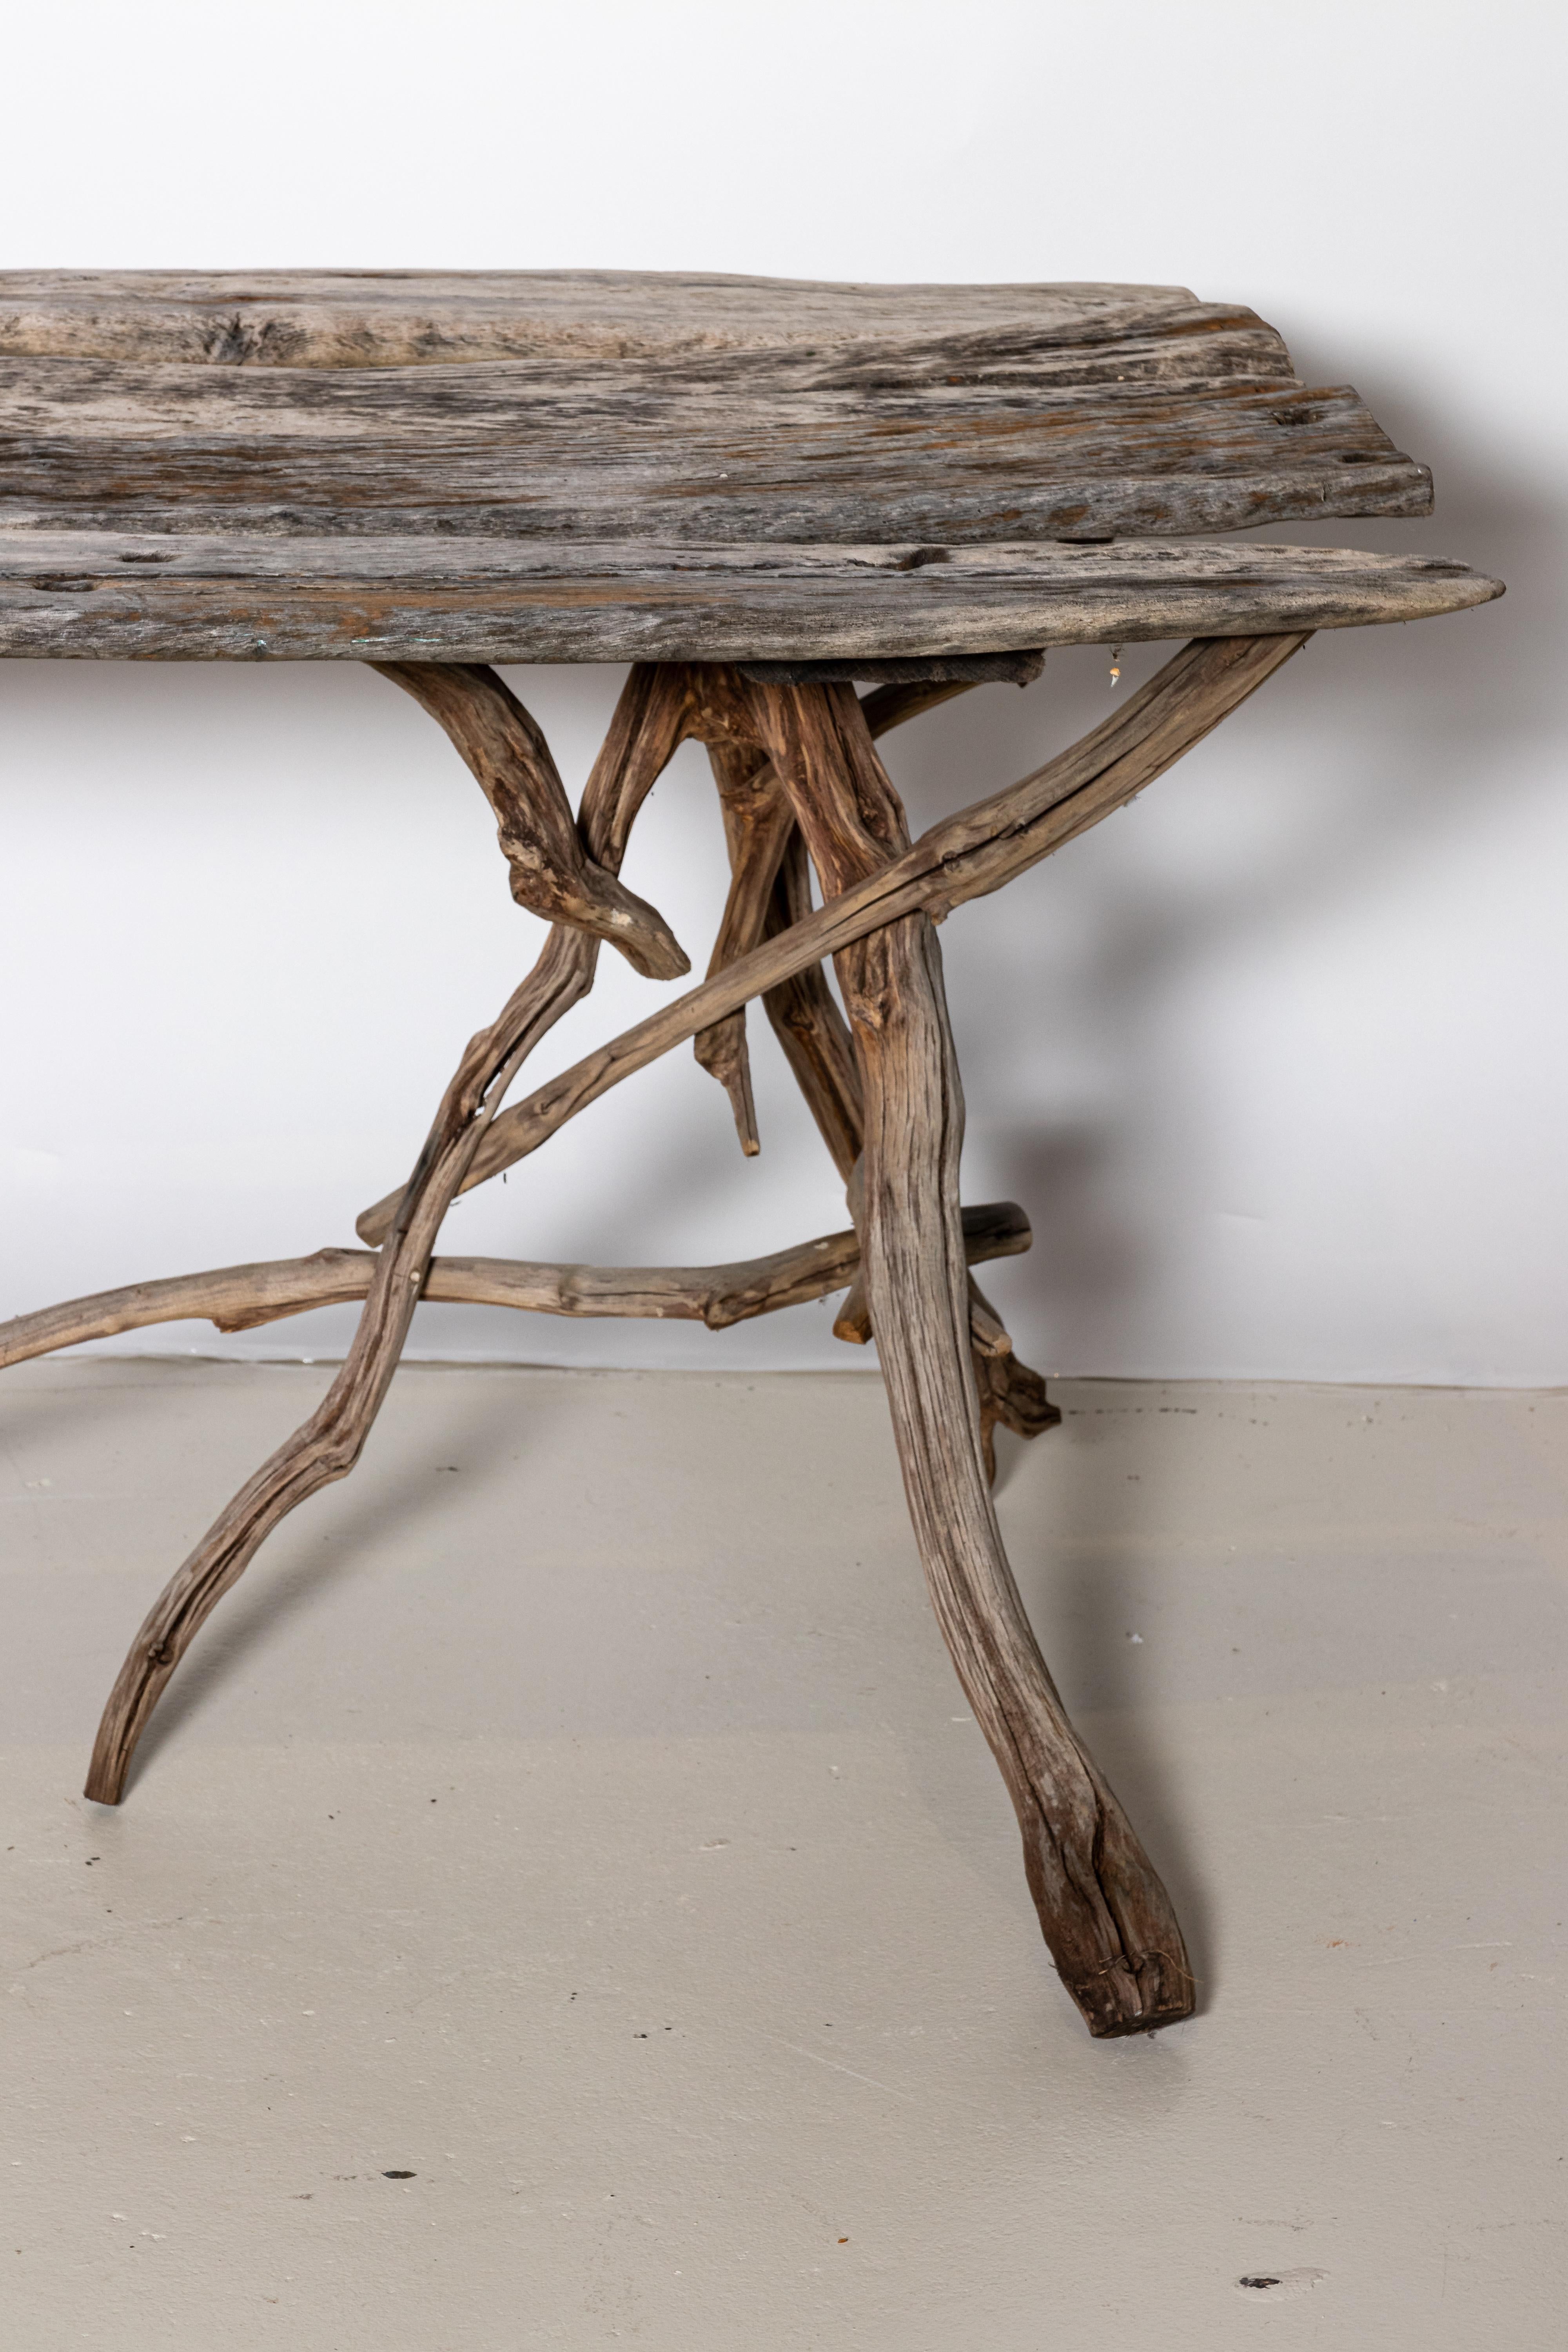 Carved English Country Reclaimed Driftwood Garden Table